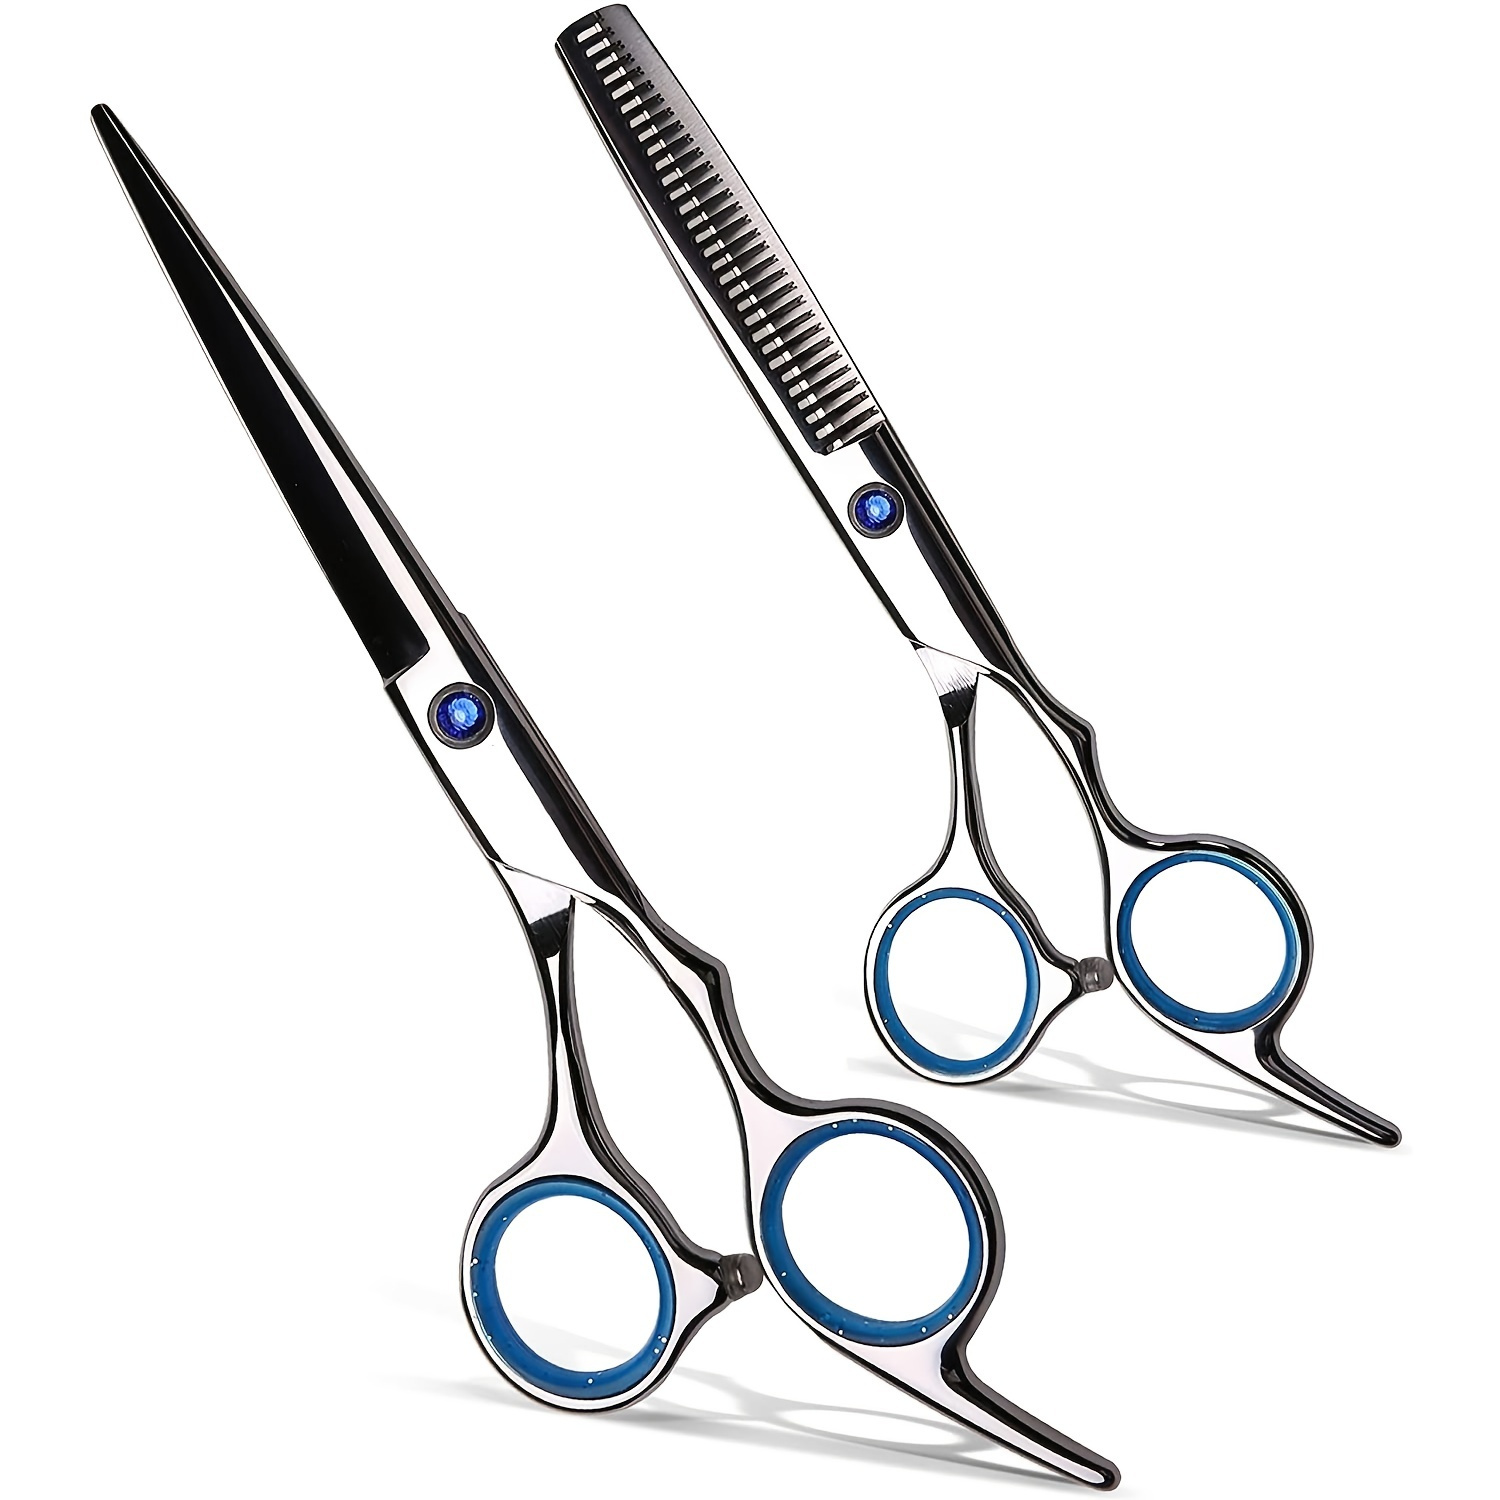 Professional Hair Scissors-1 Piece Barber Beauty Hairdressing Scissors  Styling Tools Hairdresser Scissors Japanese Steel 440C Hair Clippers For  Home Use Hair Cutting Shears Men'S And Women'S Hair Clippers Salon Styling  Tools